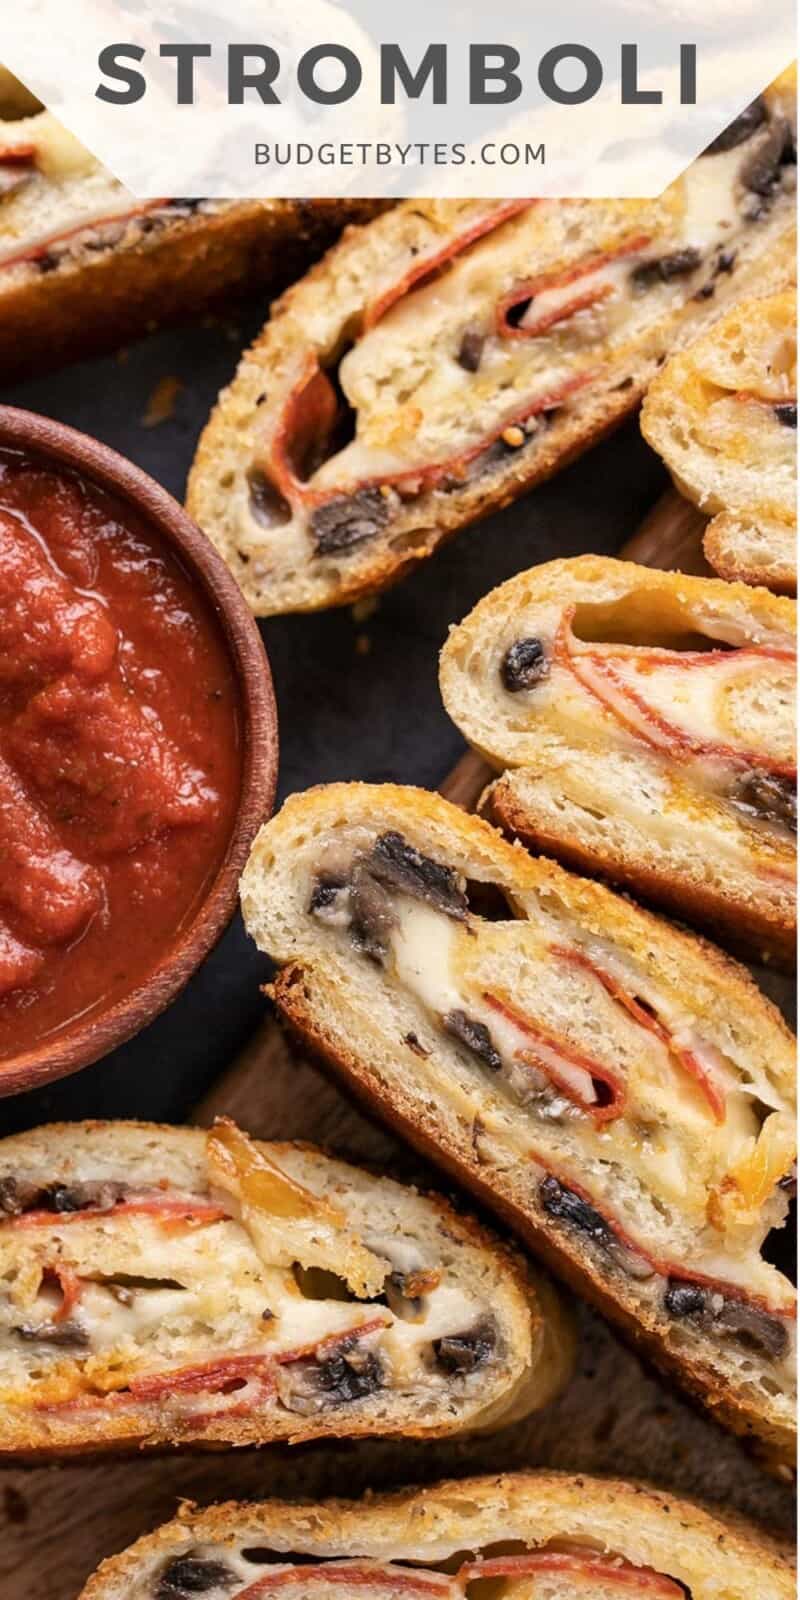 Overhead view of stromboli slices near a bowl of pizza sauces.